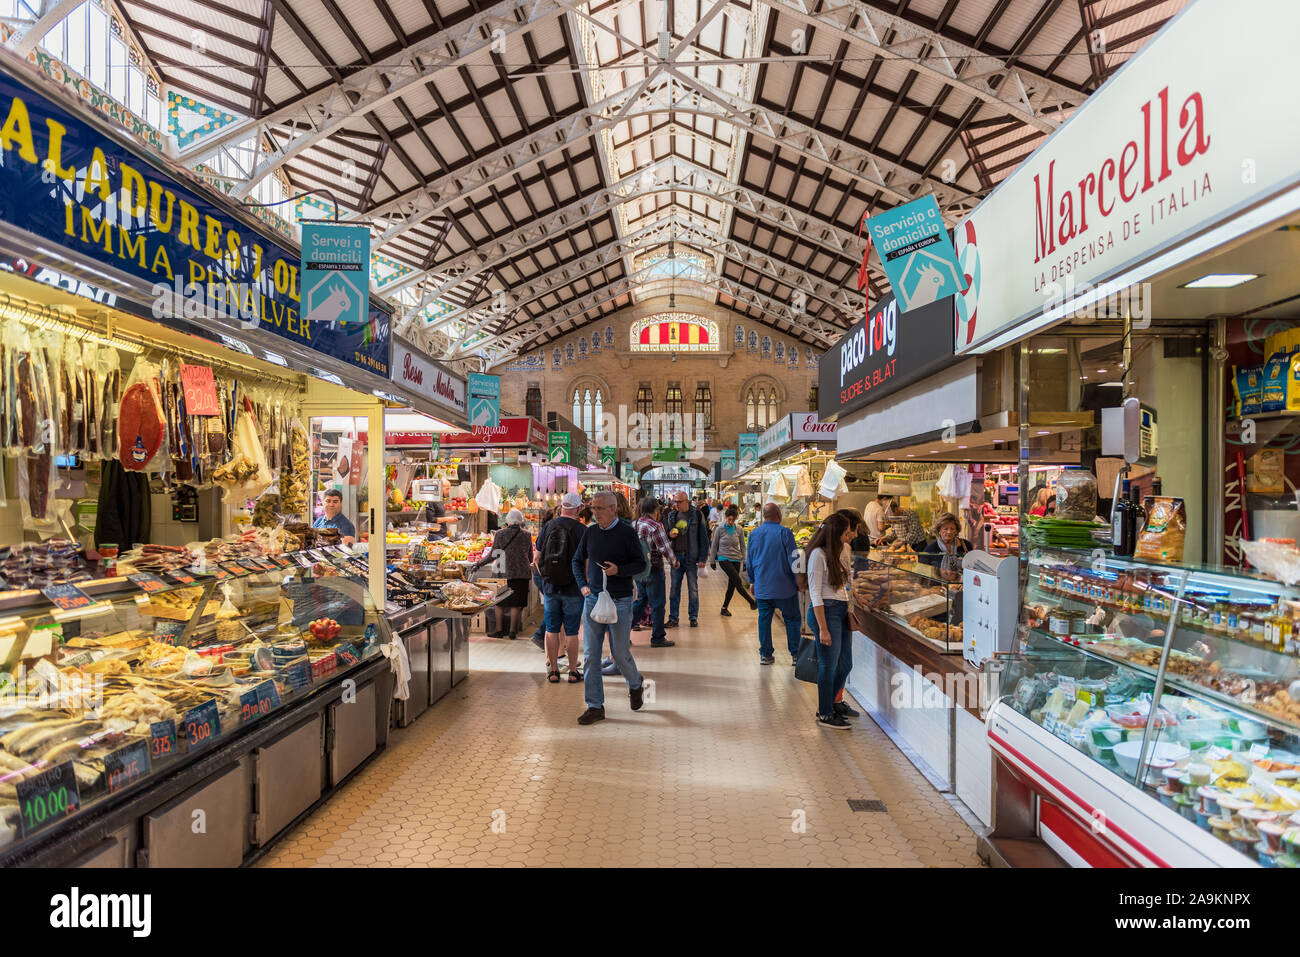 Interior of the Mercado Central (Central Market) in Valencia, Spain. It is one of the largest indoor fresh food markets in Europe. Stock Photo